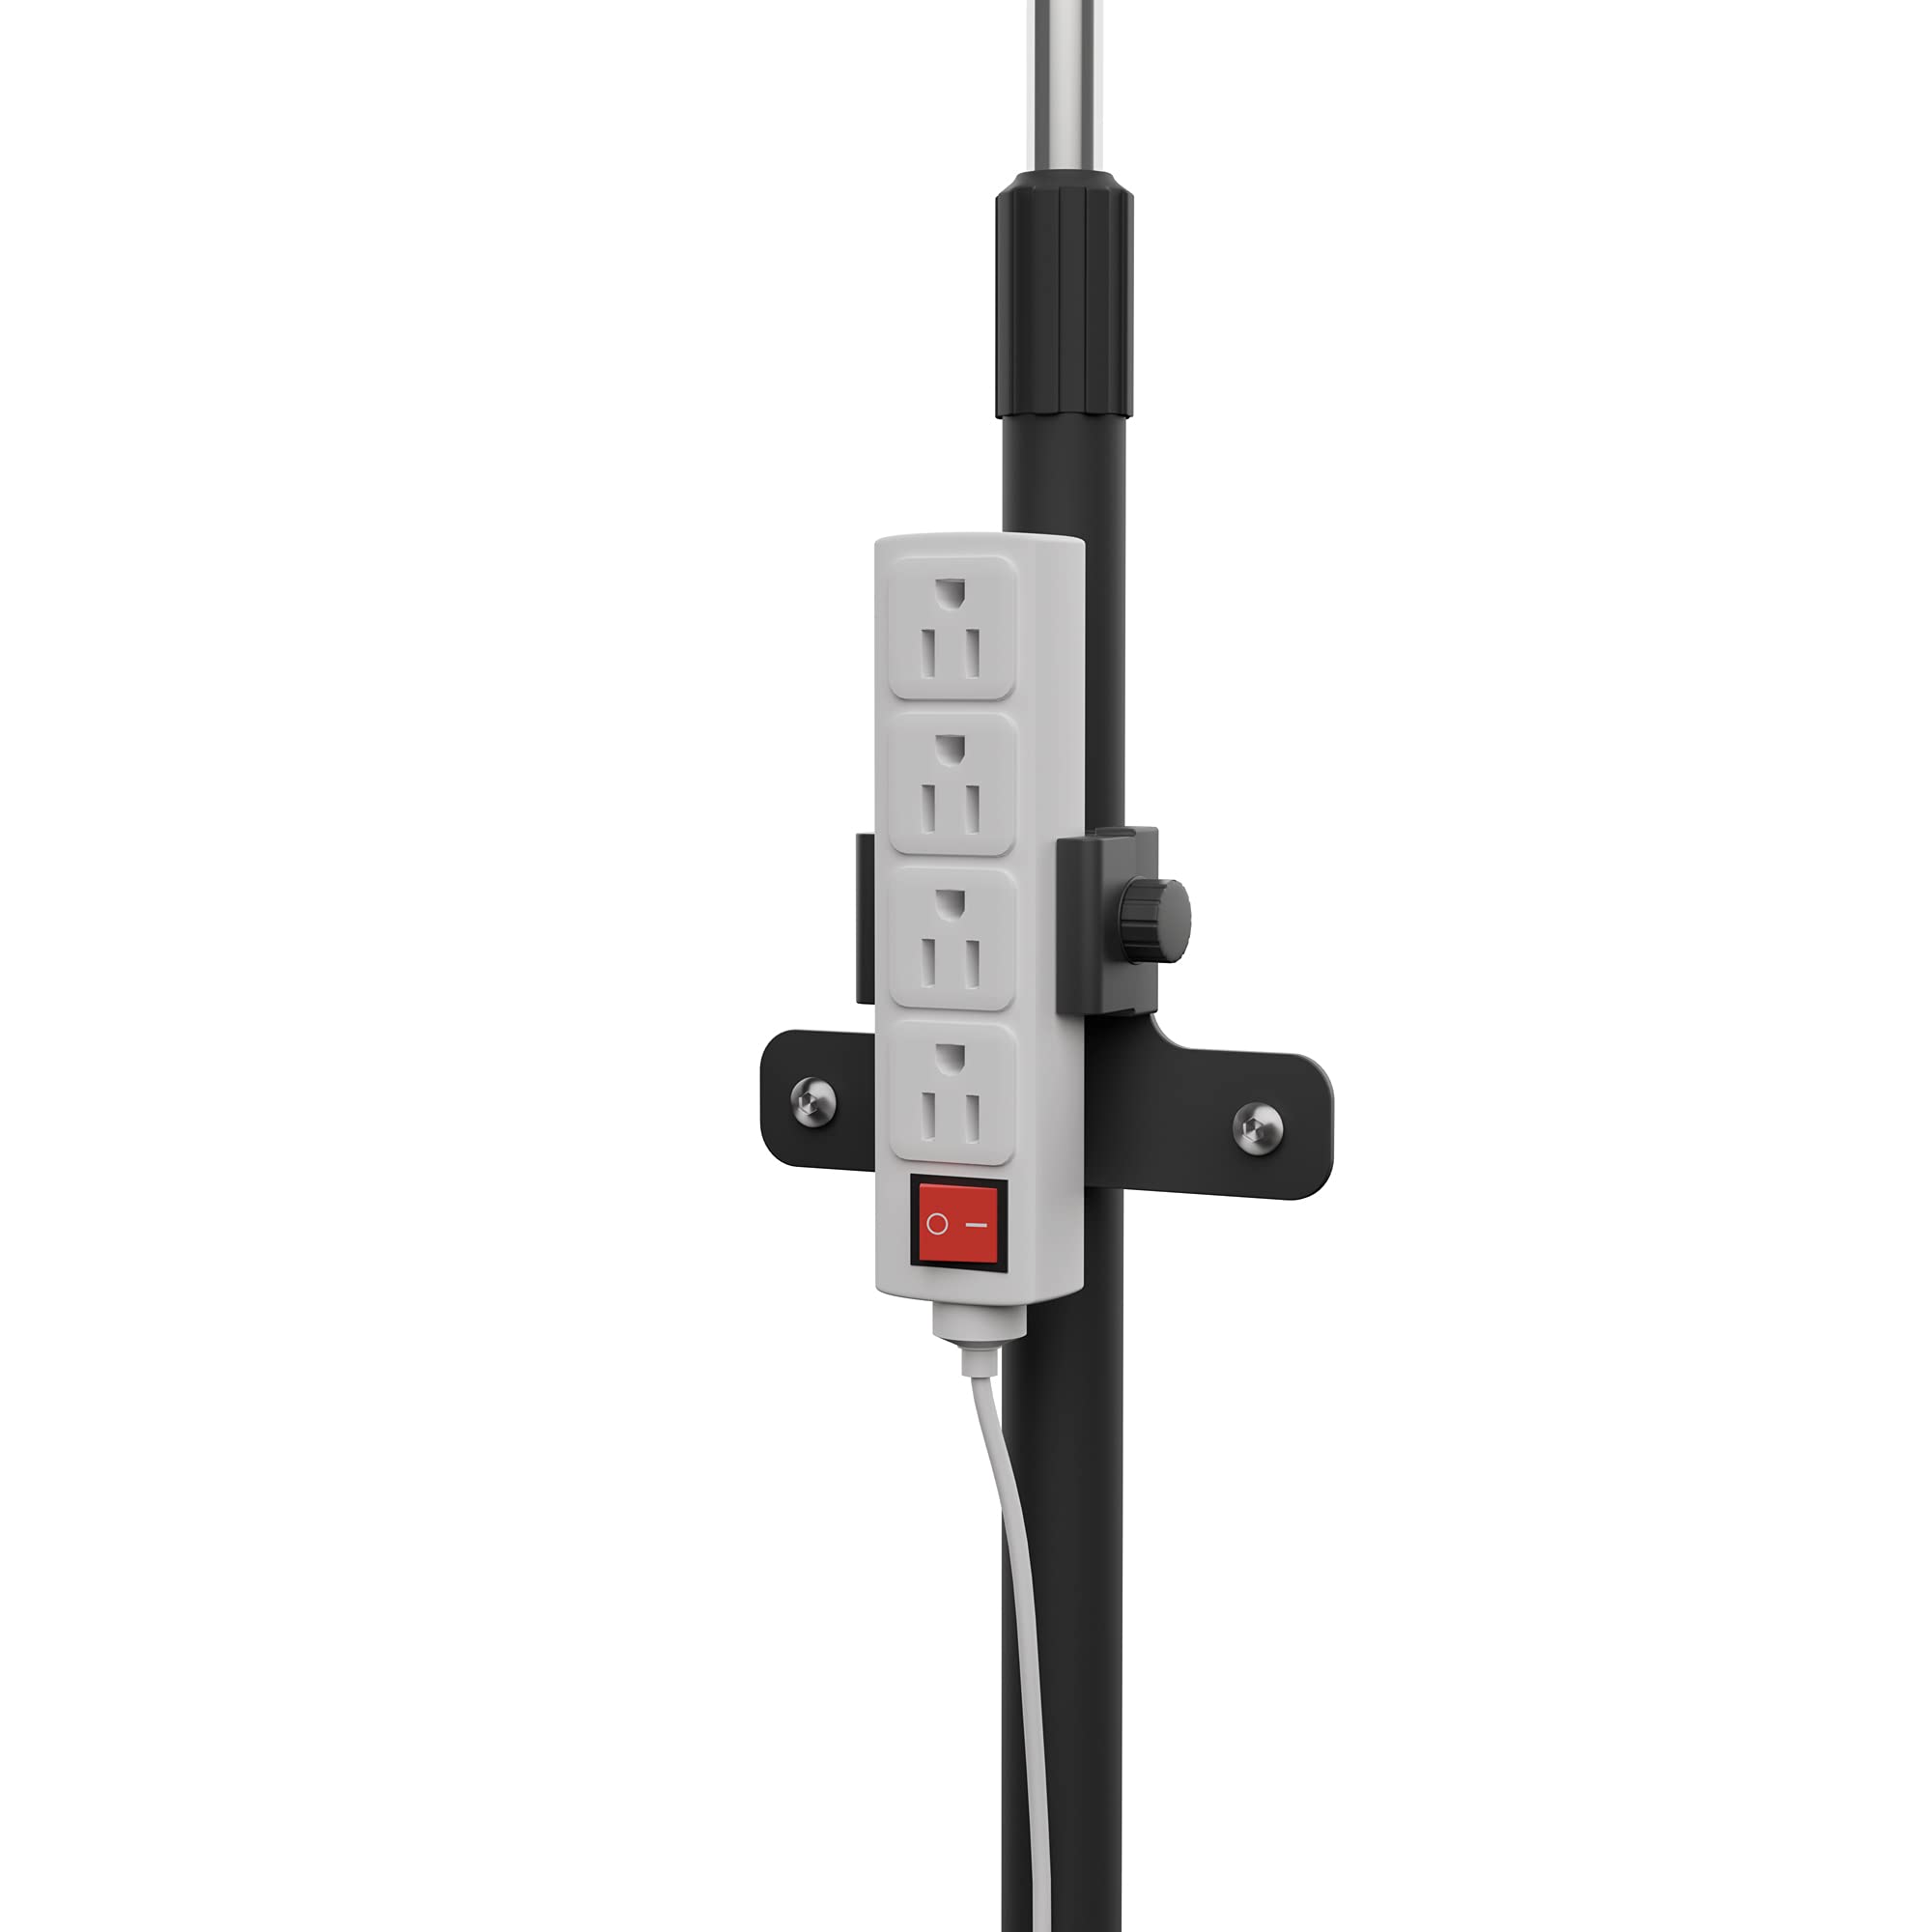 CTA Digital ADD-BPCLAMP Add-on Power Strip Clamp for CTA Digital Mobile Floor Stands